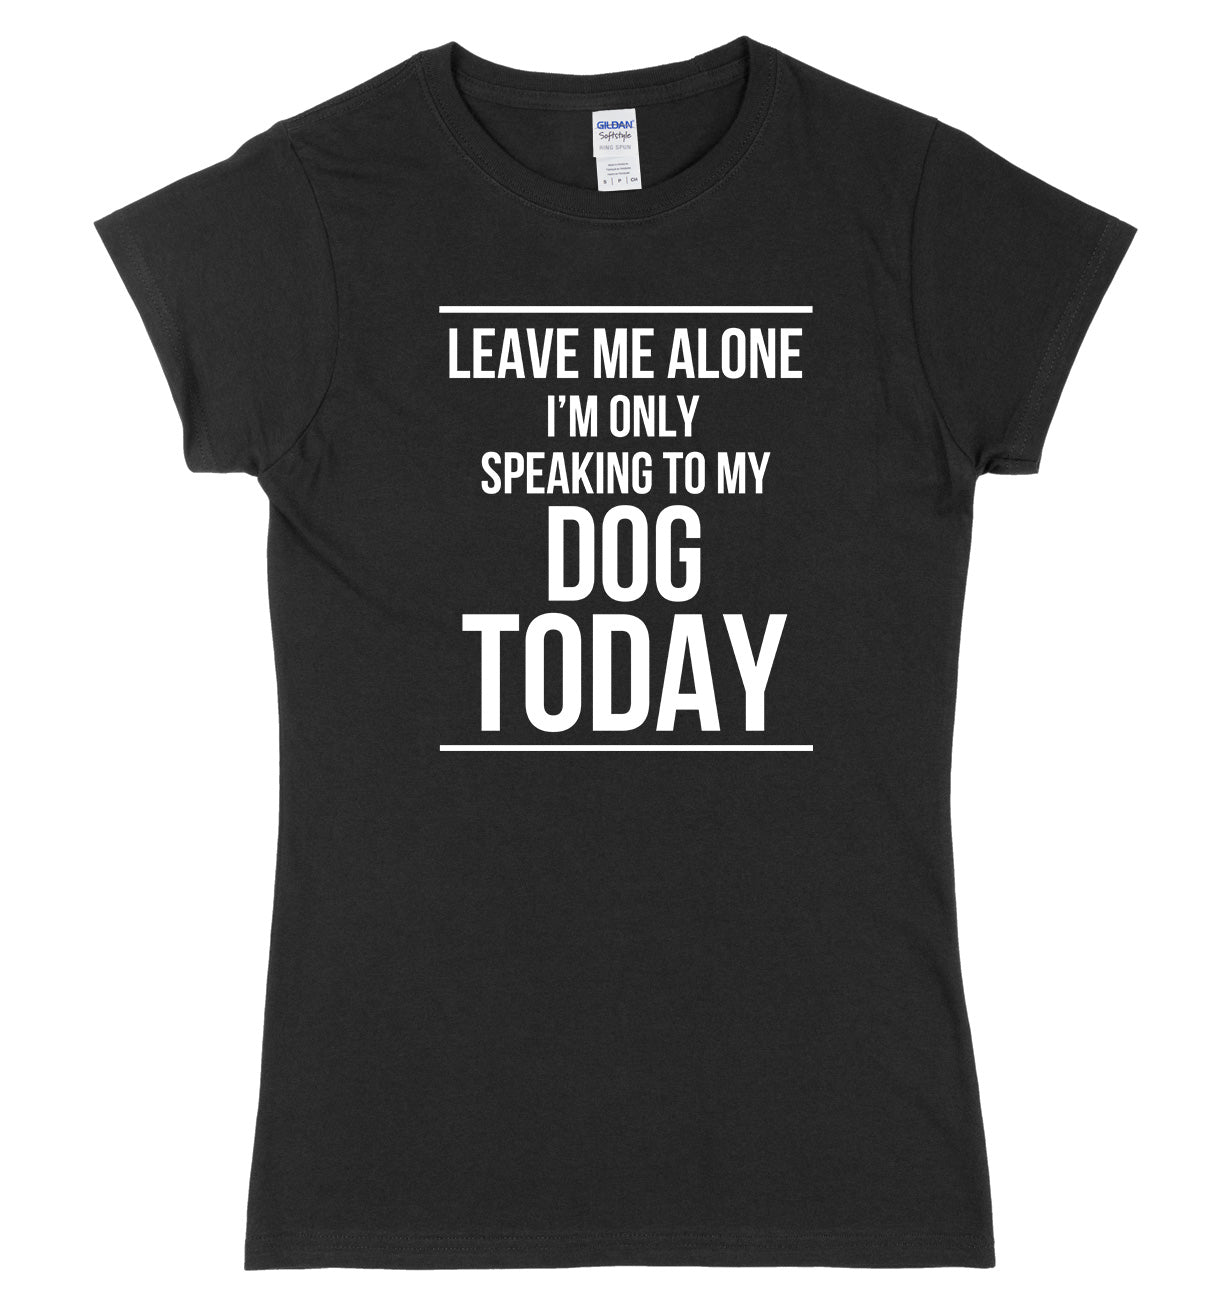 LEAVE ME ALONE I'M ONLY SPEAKING TO MY DOG TODAY FUNNY WOMENS LADIES SLIM FIT  T-SHIRT